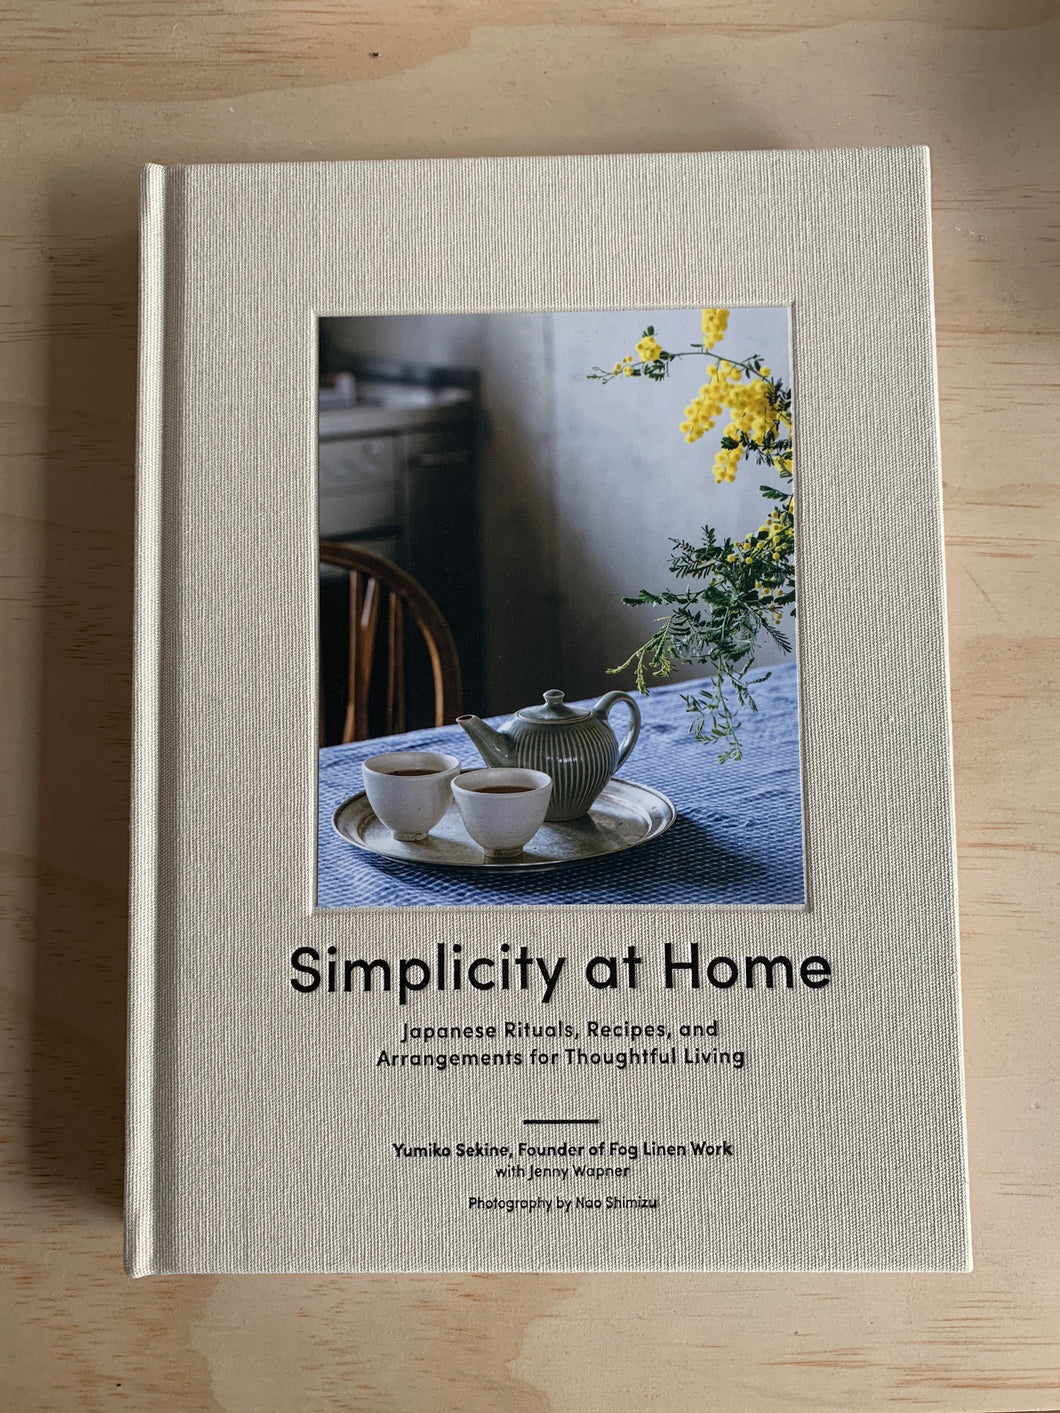 Book : Simplicity at  Home By Yumiko Sekine (Fog line works)